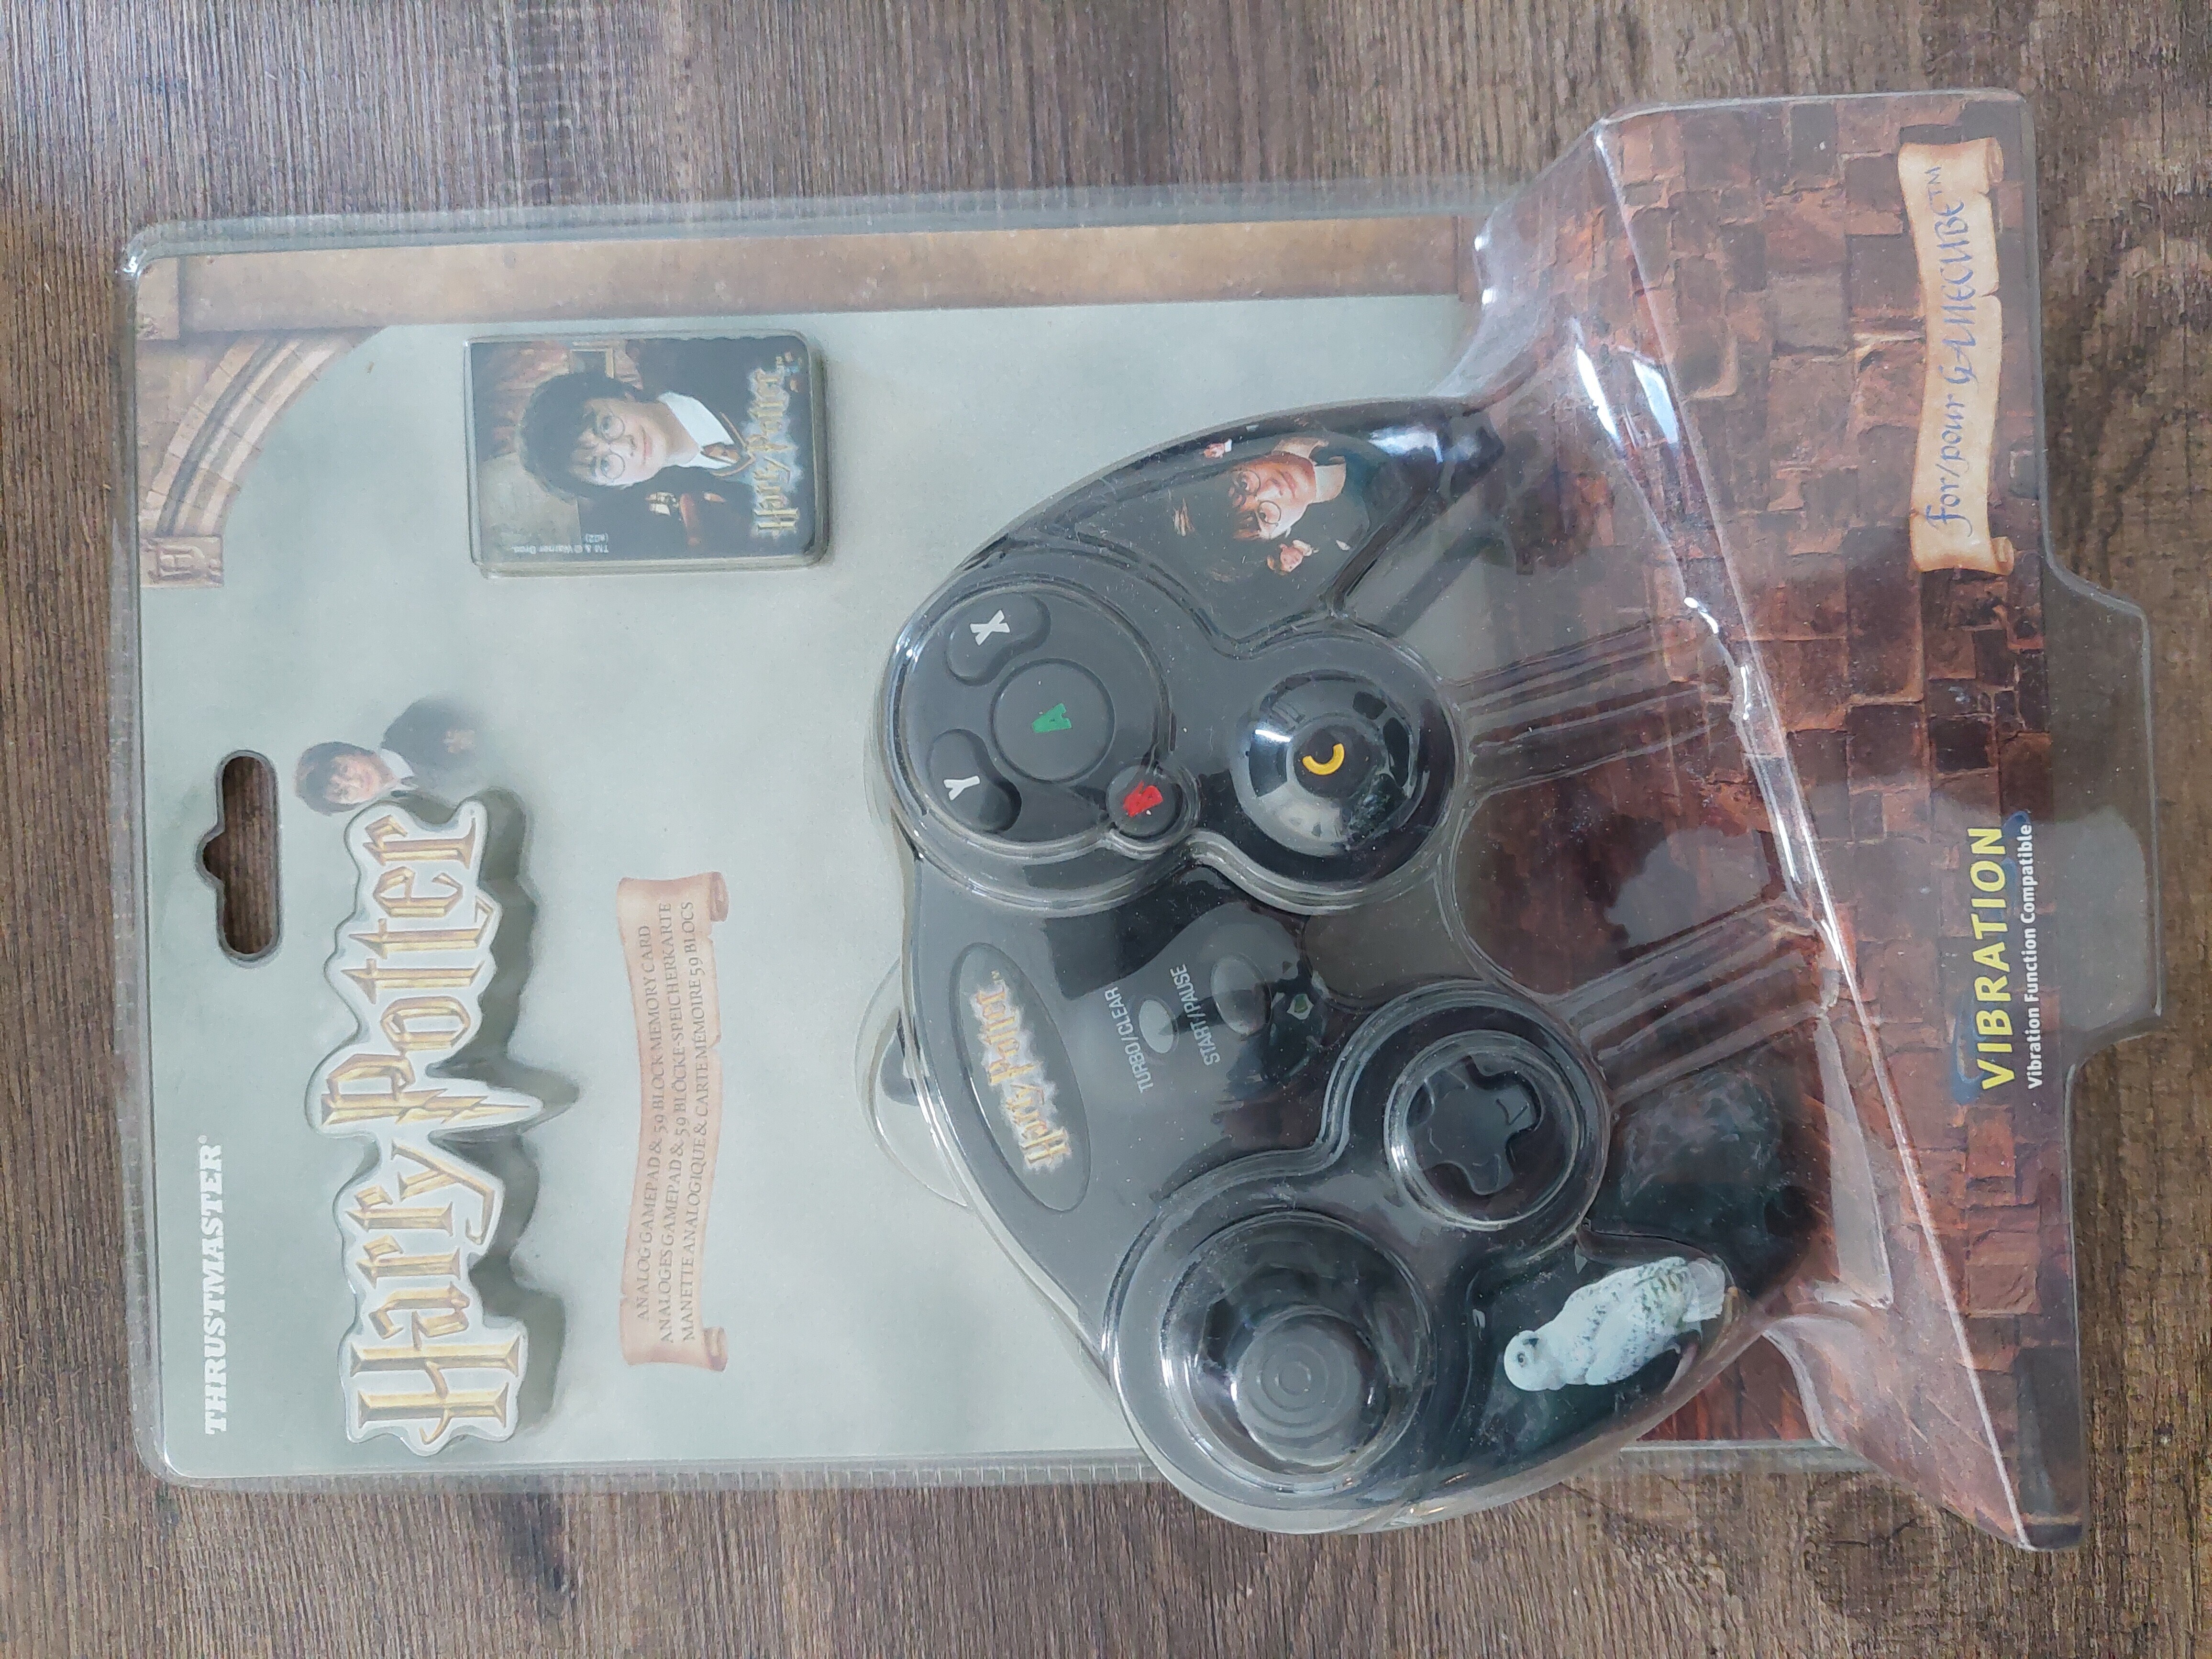  Thrustmaster Gamecube Harry Potter controller &amp; memory card Controller